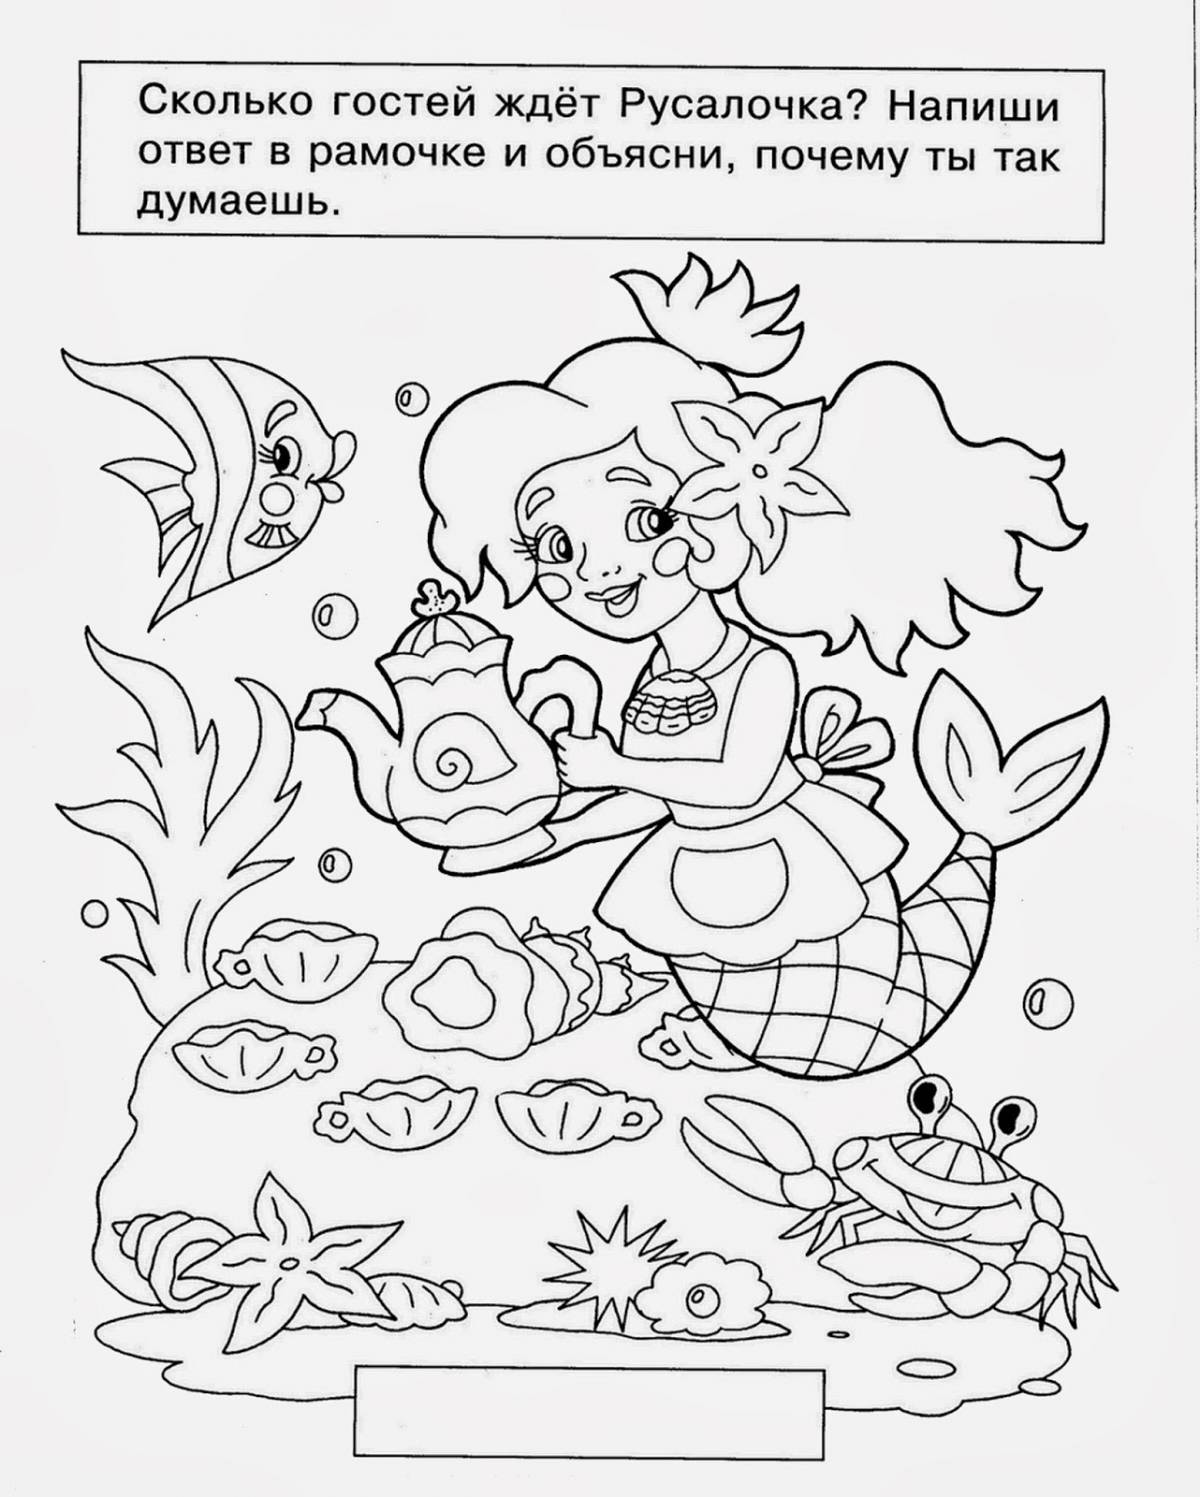 Fun coloring book for preschoolers 6-7 years old